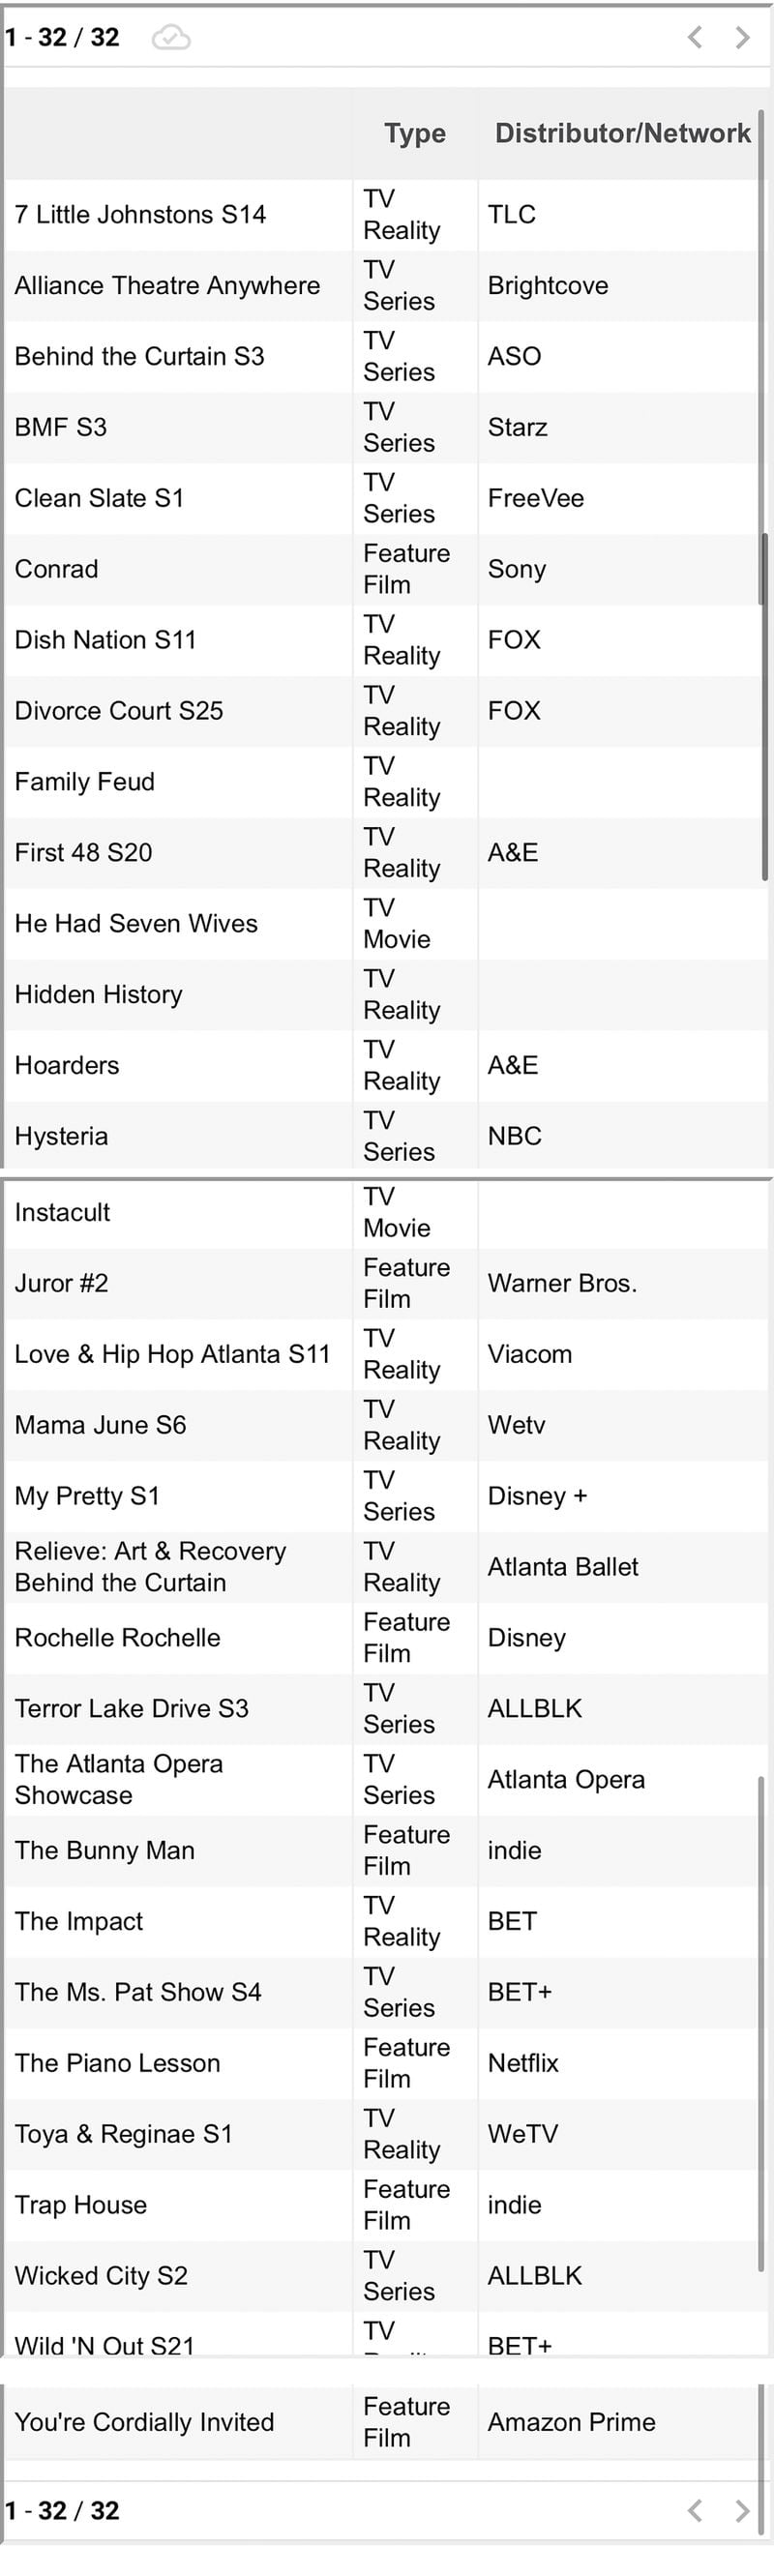 The active film and TV listings via the Georgia Film Office on May 15, 2023.